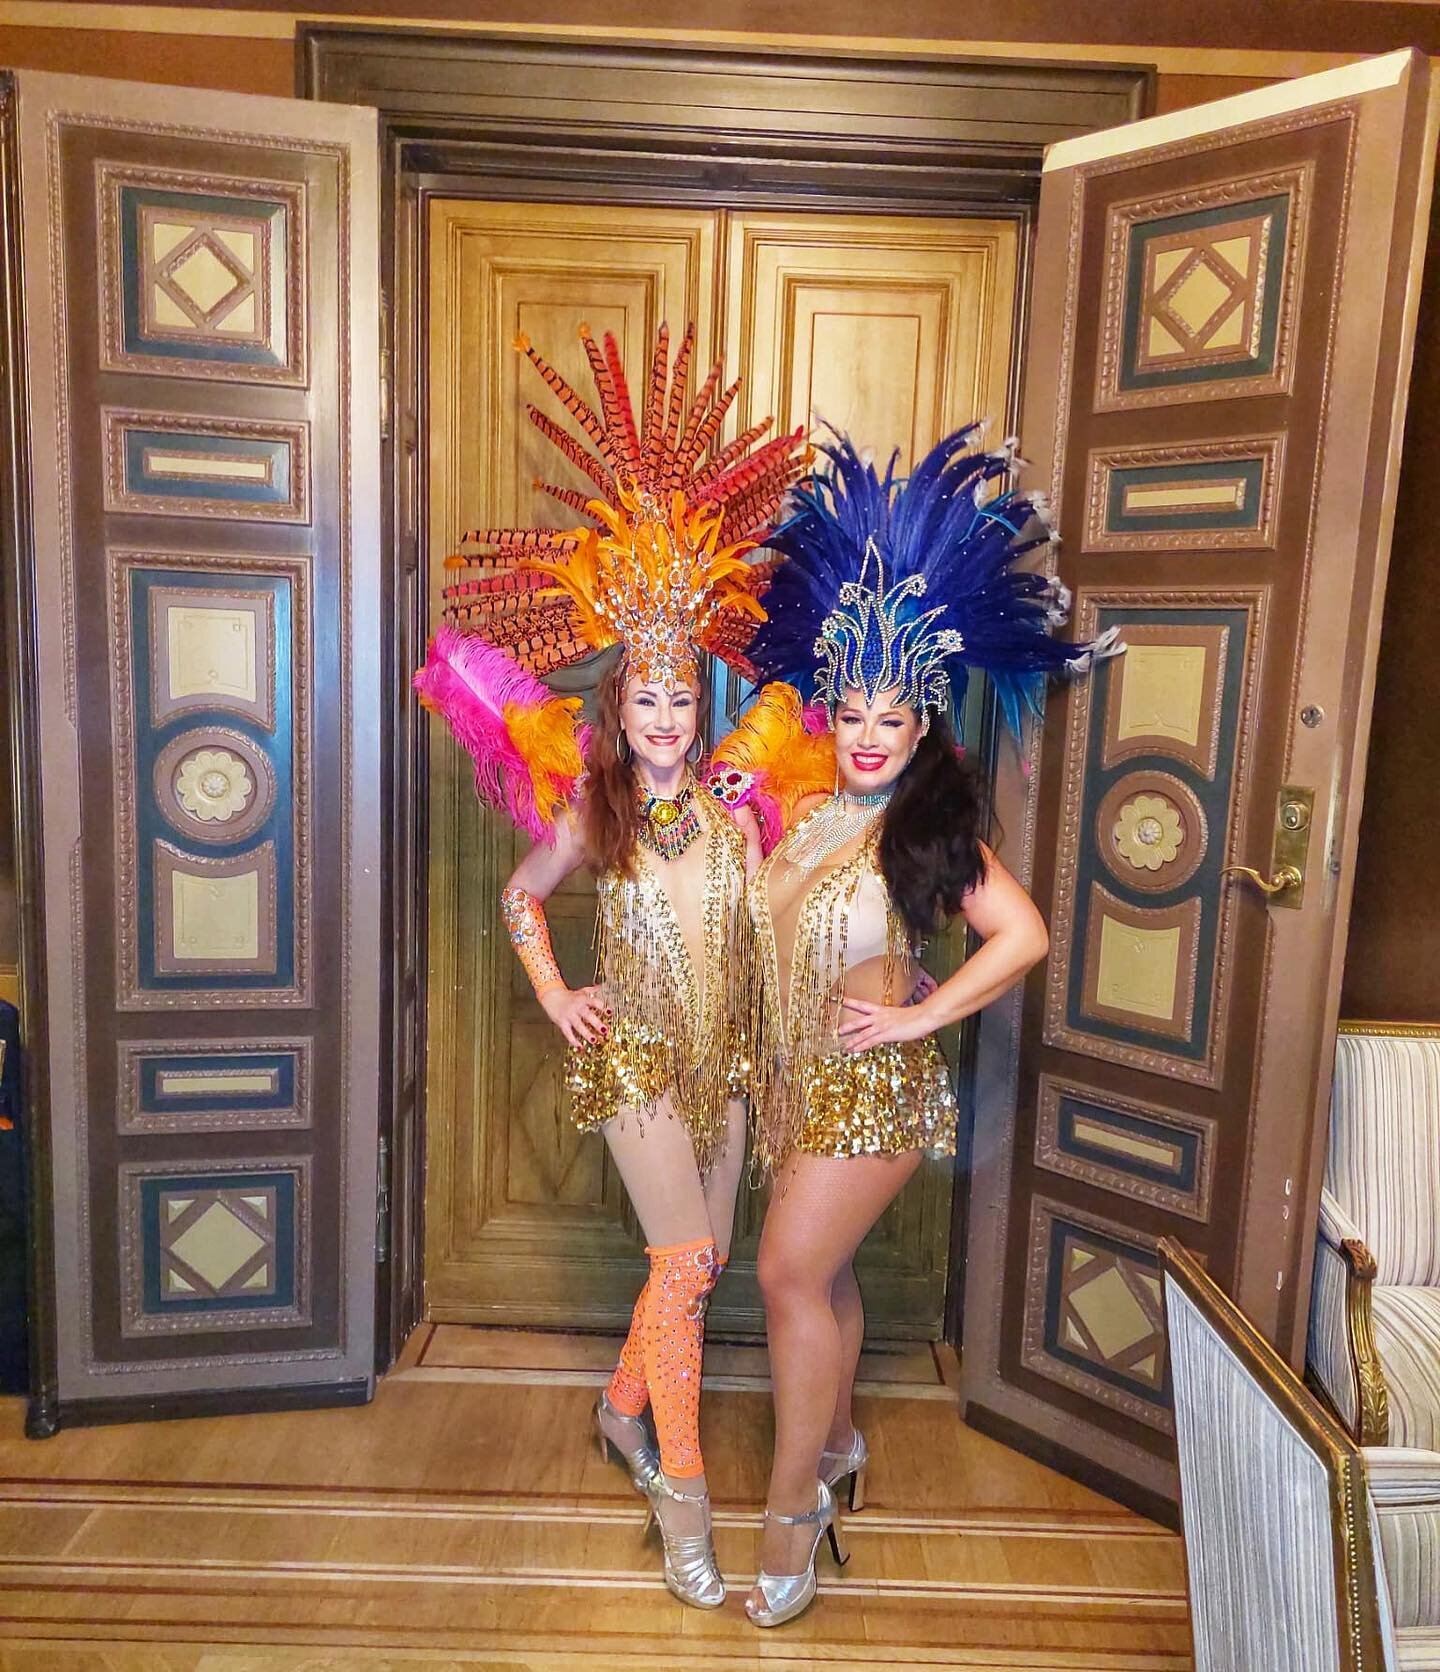 Yesterday we had the honor to be a surprise at Birthday party @grandhotelstockholm ✨We had an amazing time! Thank you @samsum_73 🫶🏻

#sambadancers #sambadansare #grandhotelstockholm #birthdayparty #eventstockholm